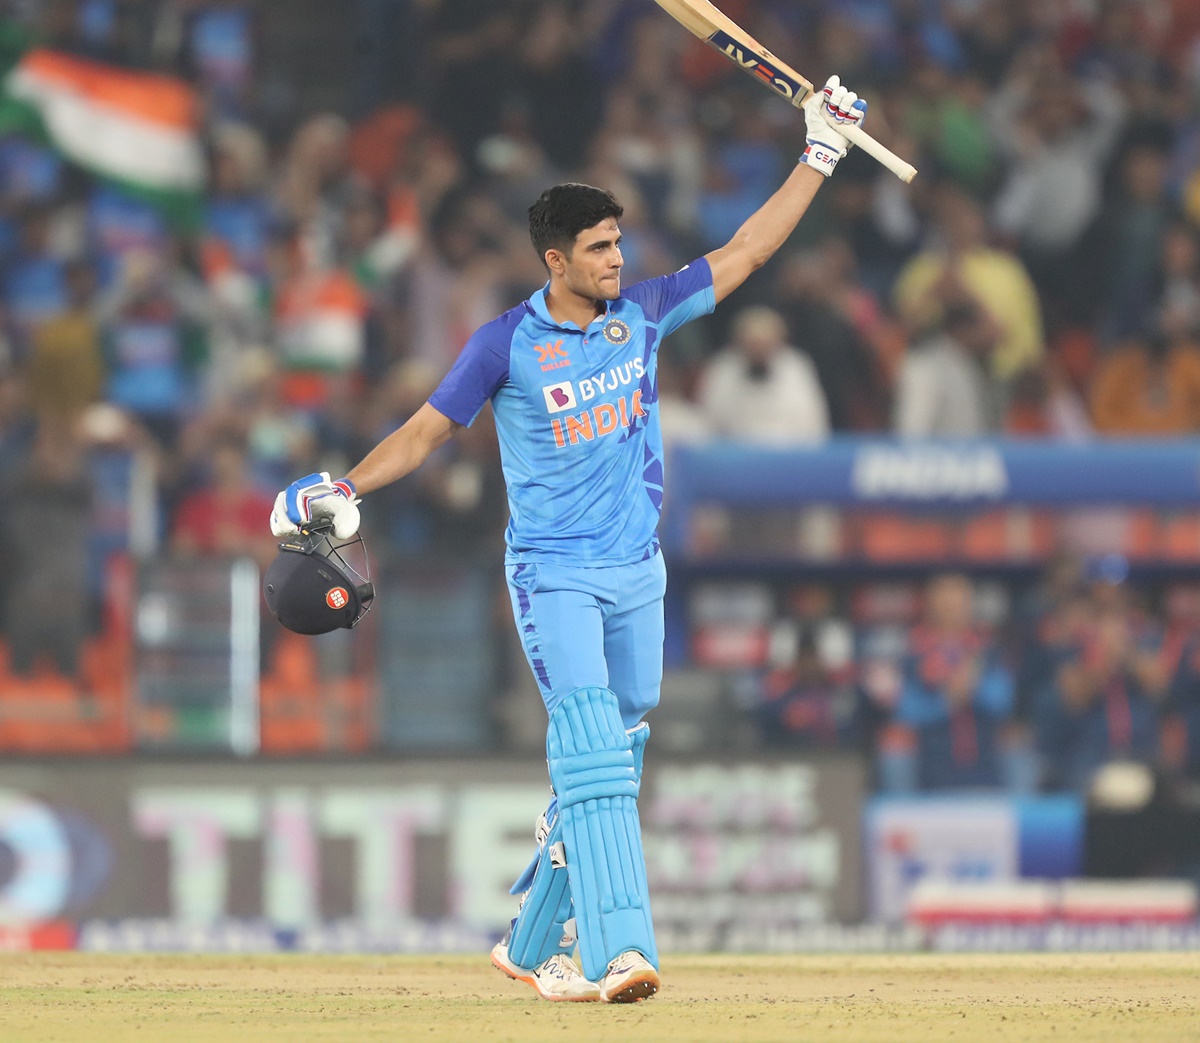 Gill is top-ranked Indian ODI batter